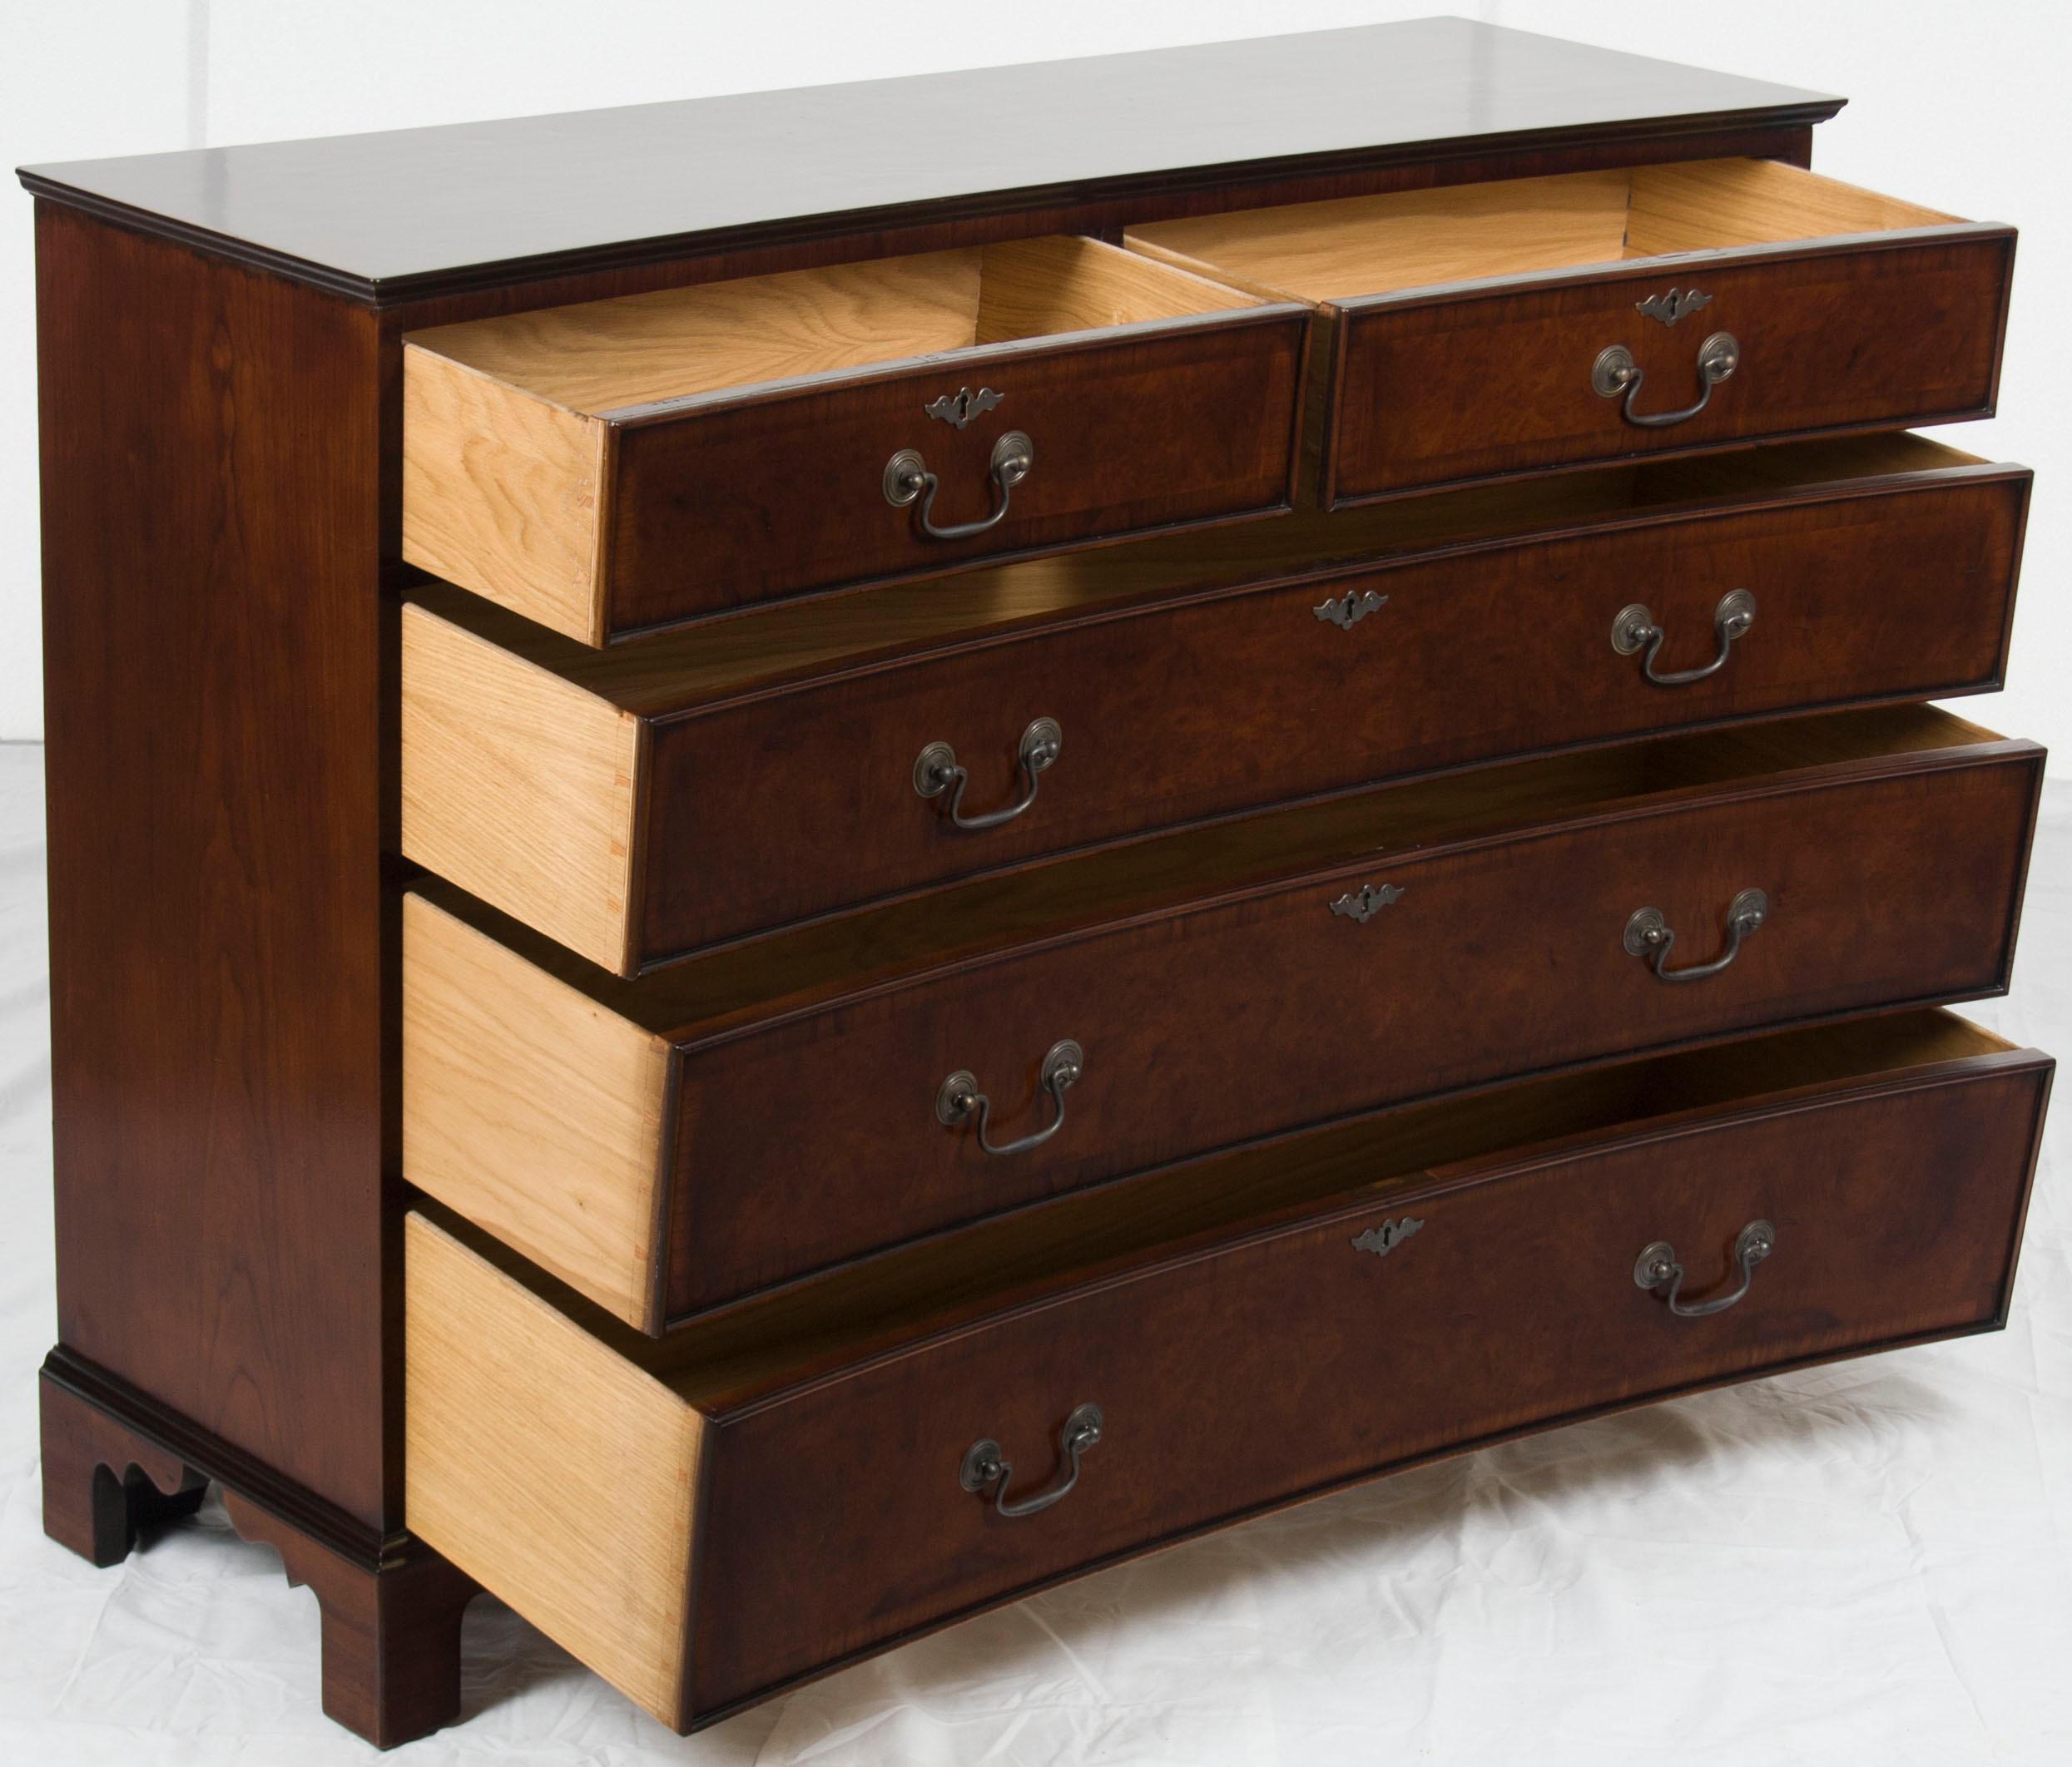 Georgian Inverted or Reverse Bow Front Narrow Chest of Drawers Dresser For Sale